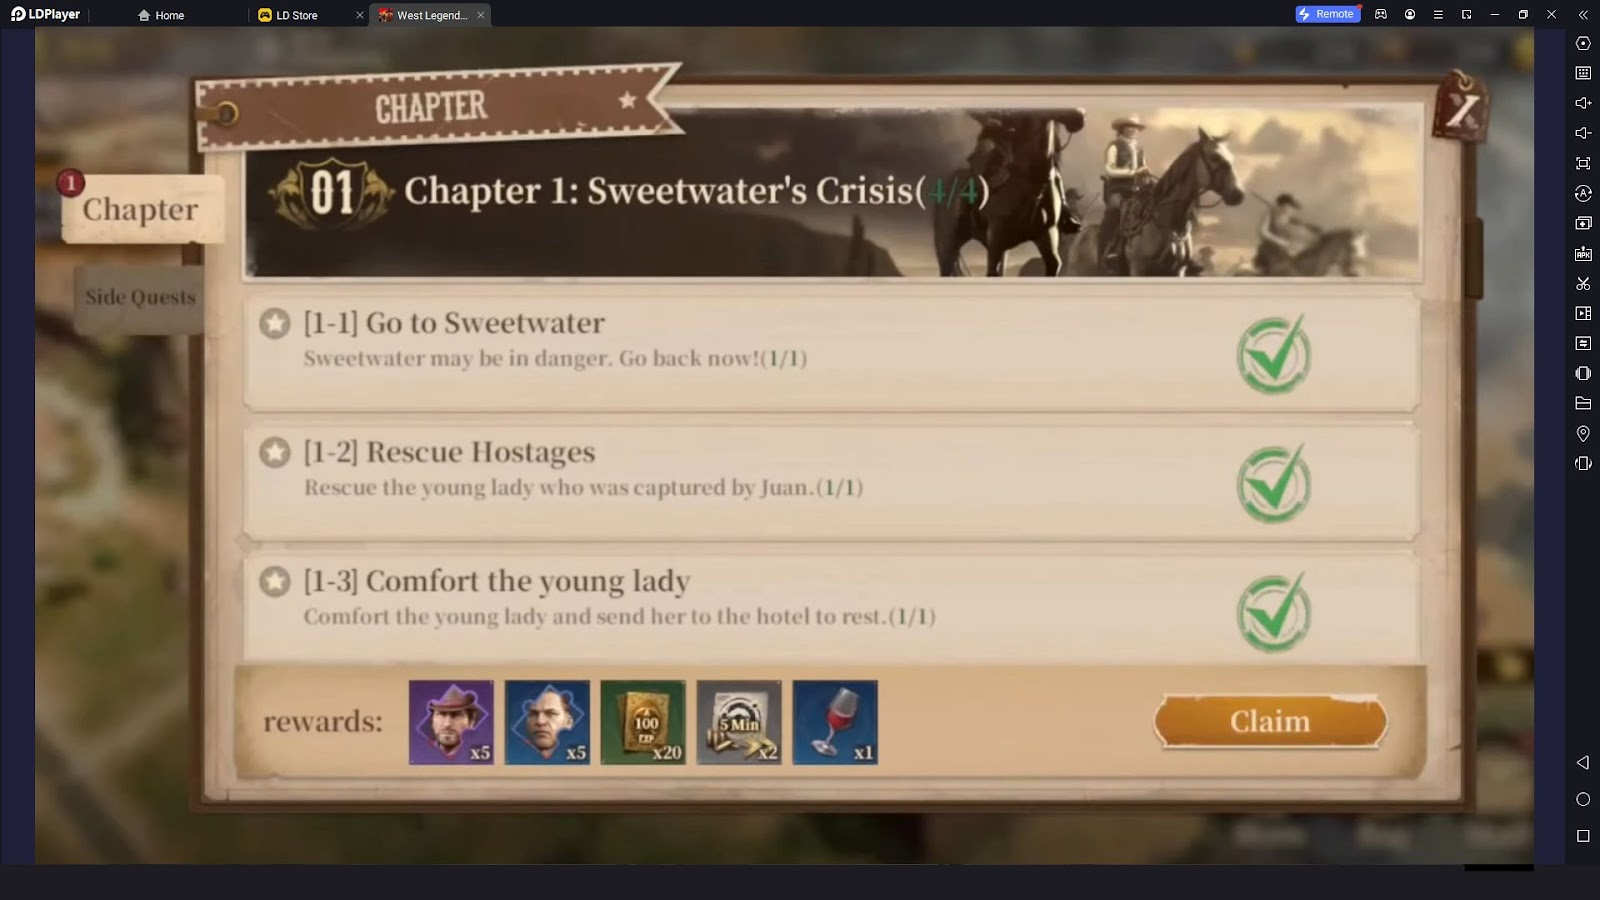 Complete Chapter Quests and Quick Progress in Chapters